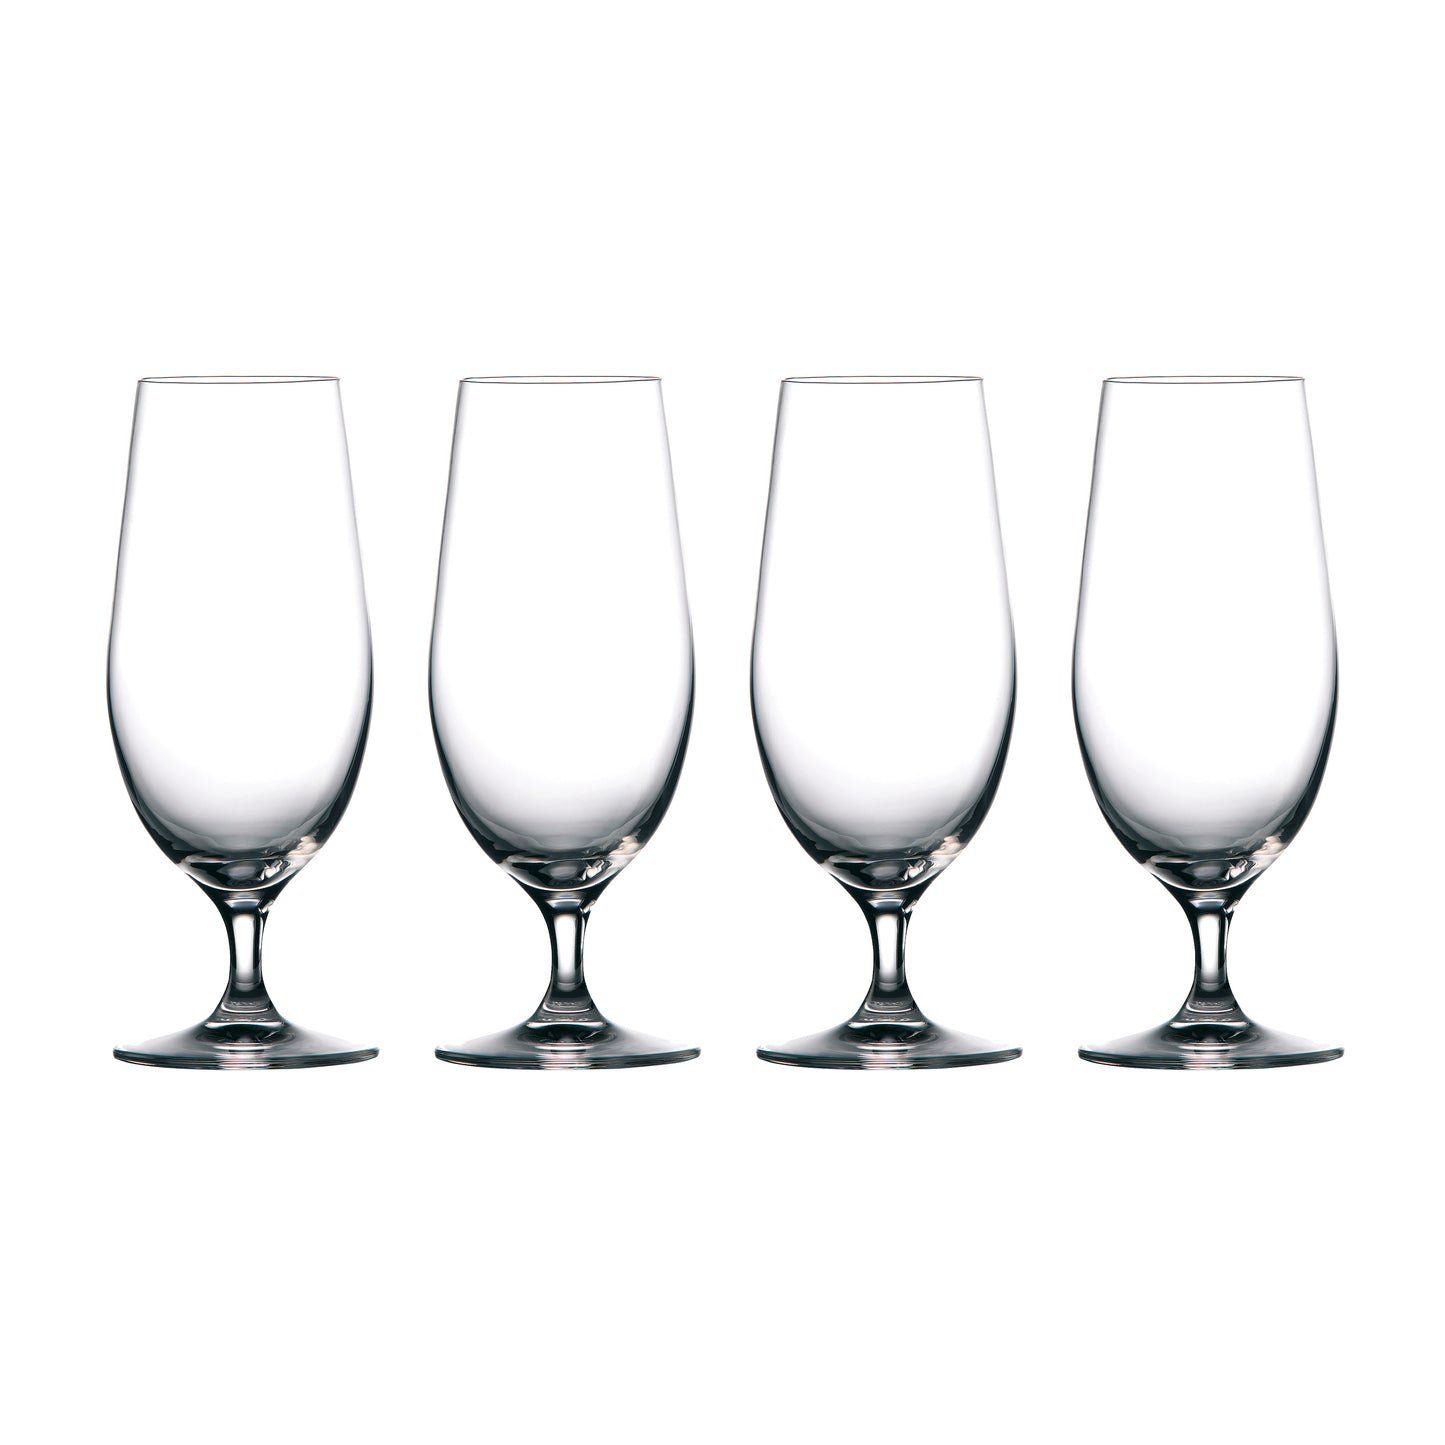 Waterford Marquis Moments Beer Glass 15.5floz, Set of 4